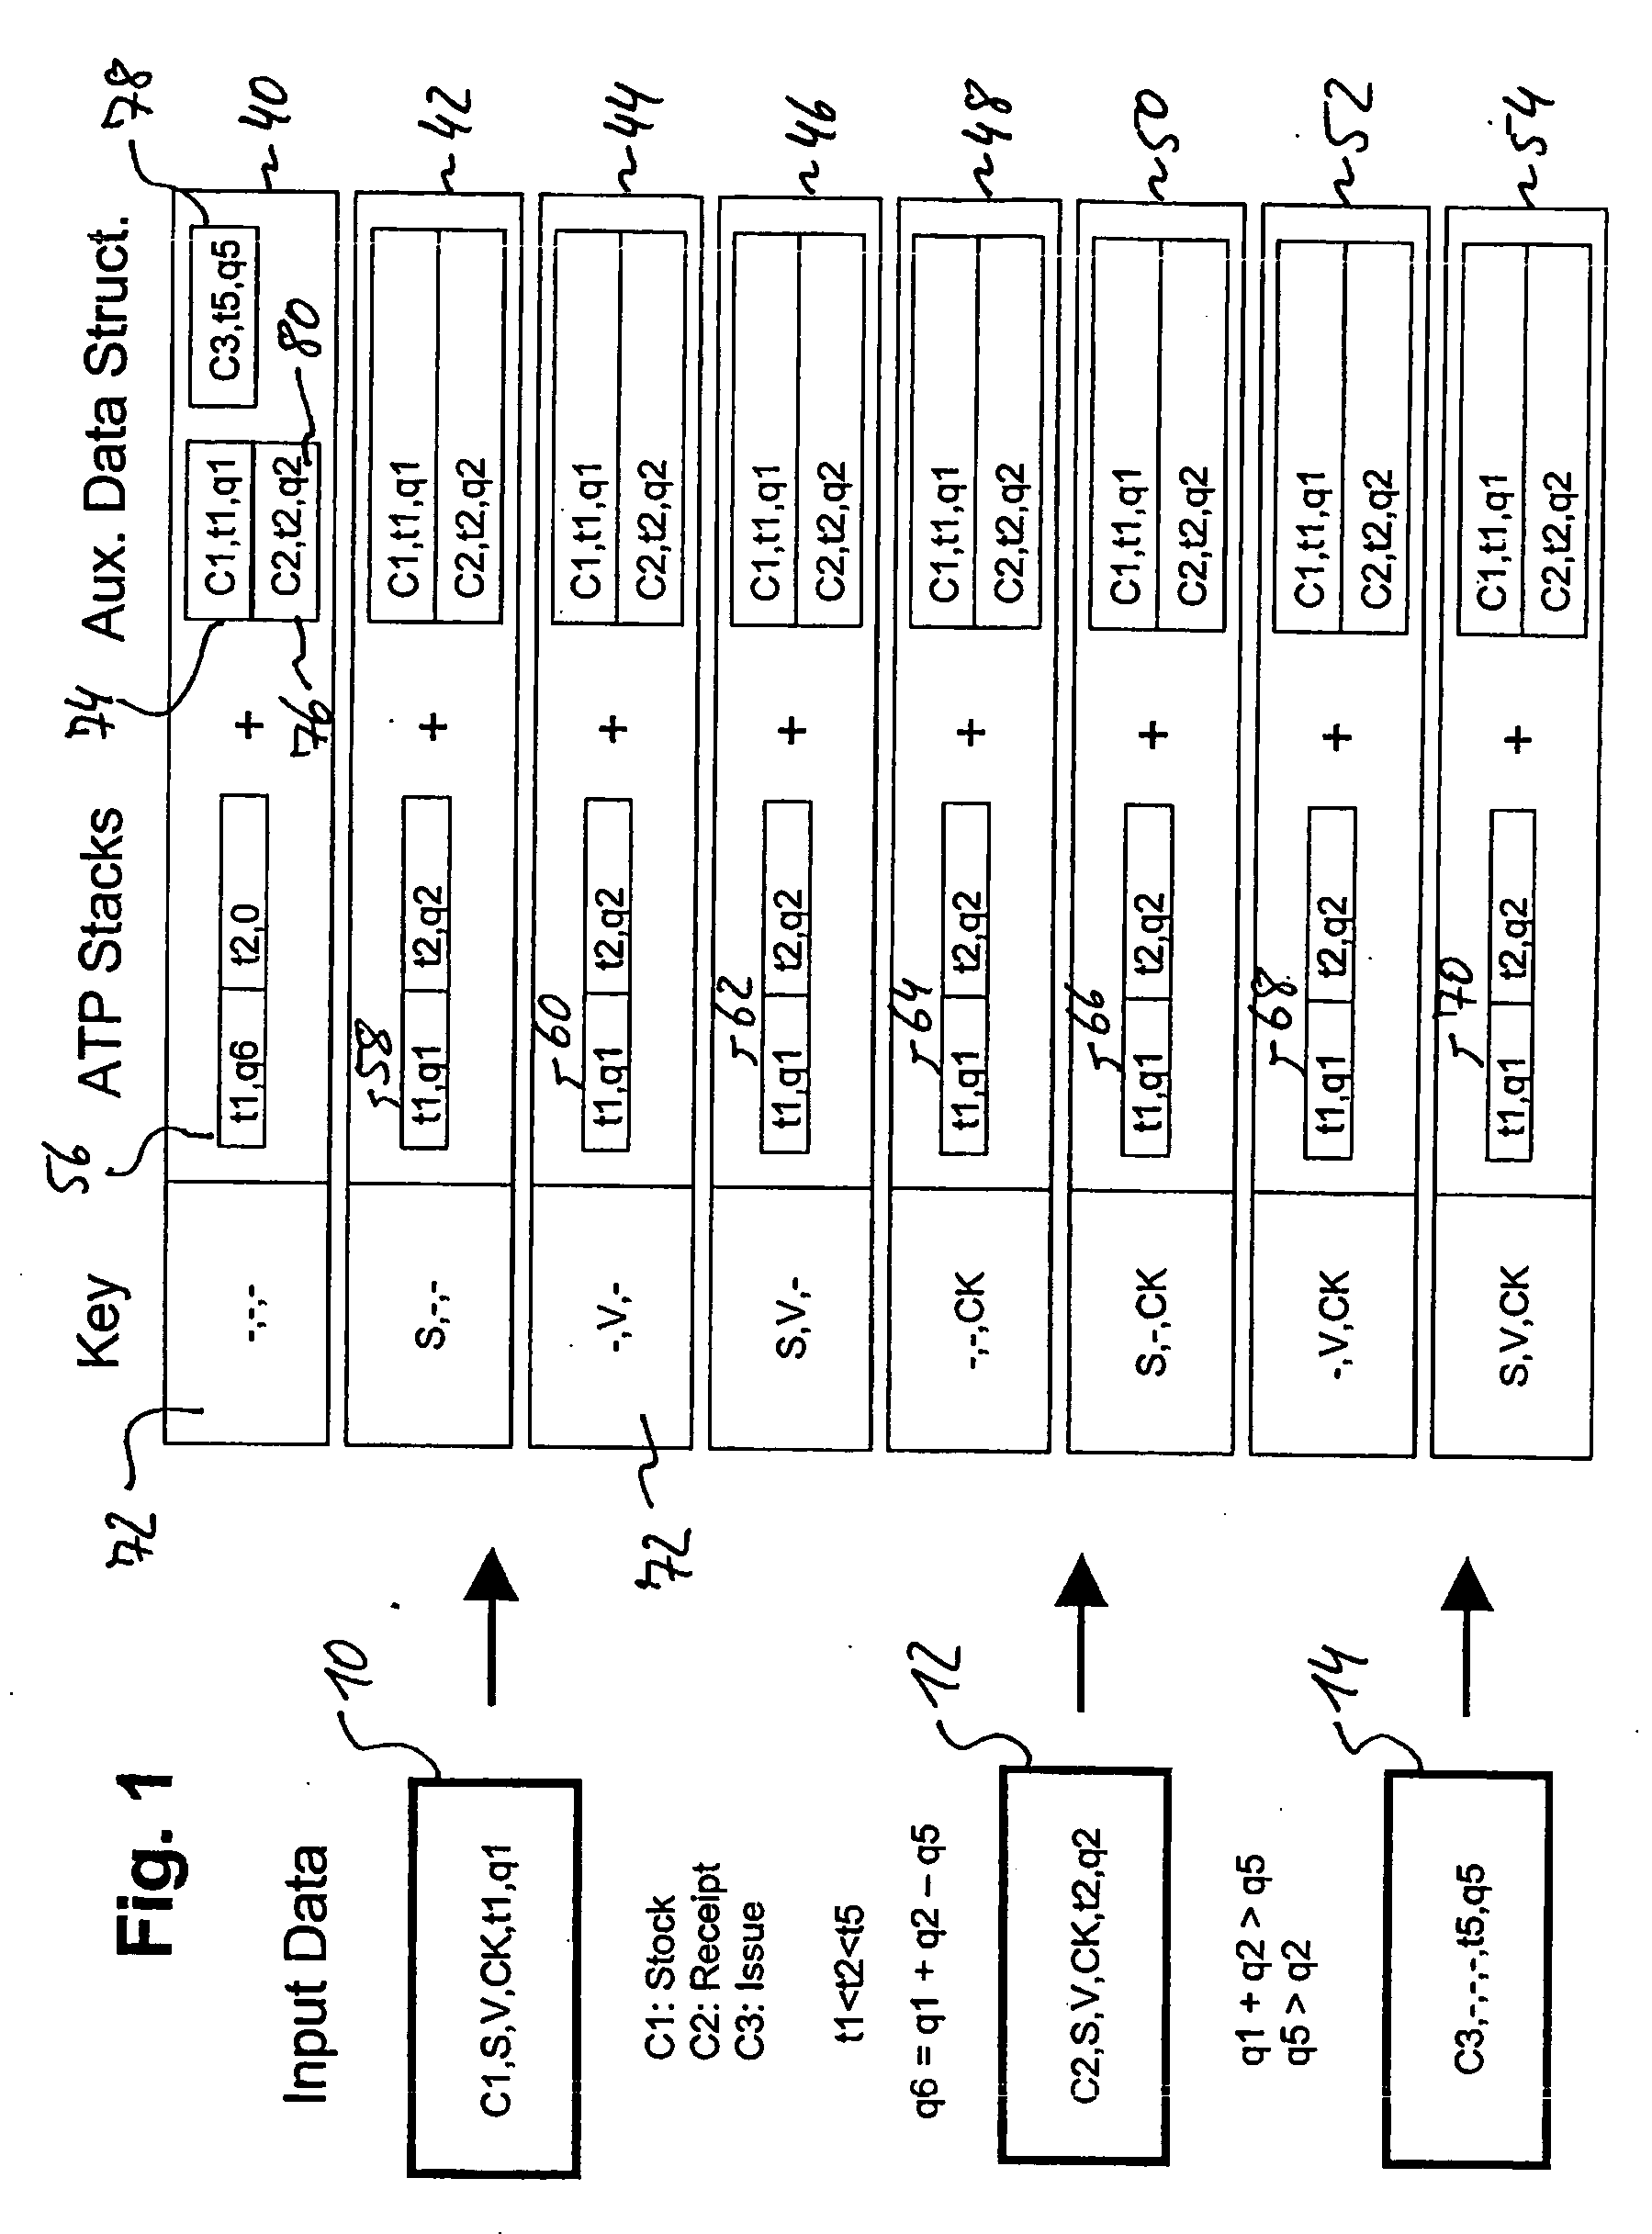 Systems, methods, and articles of manufacture for performing product availability check